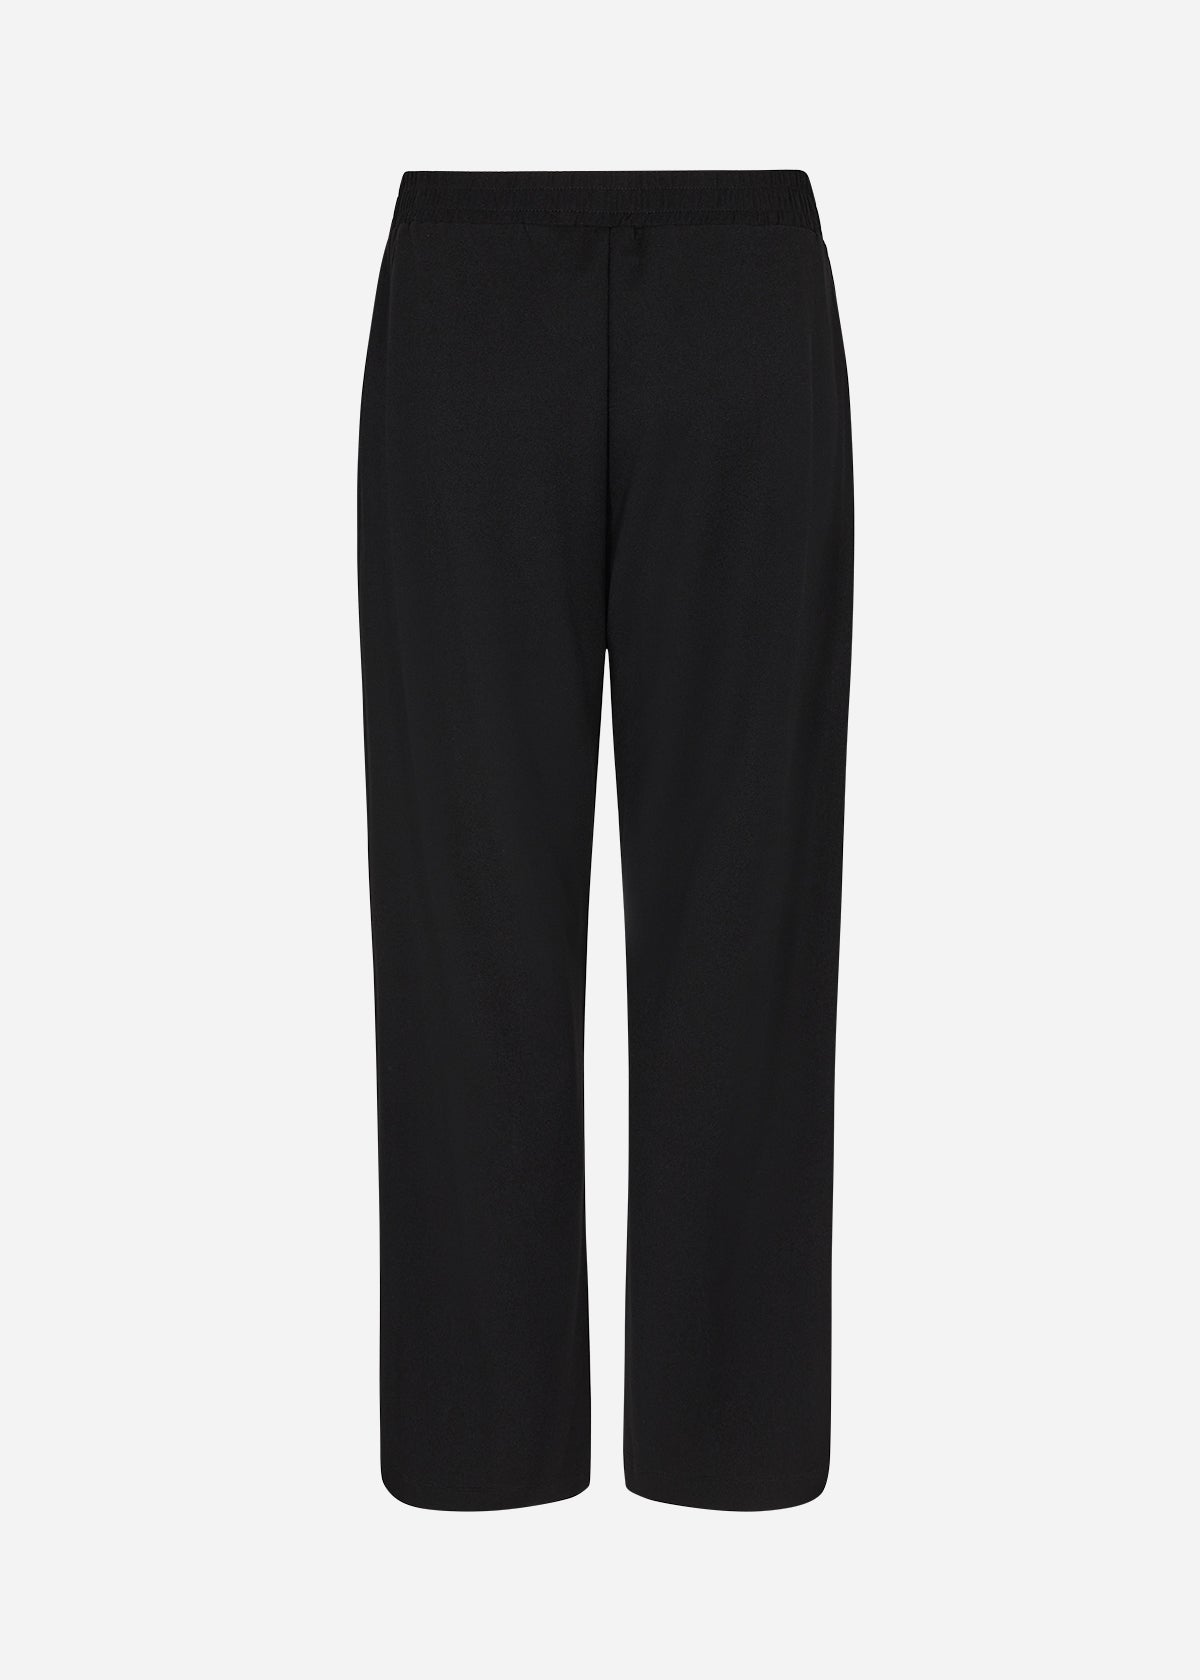 Soya Concept SIHAM Cropped Black Trousers